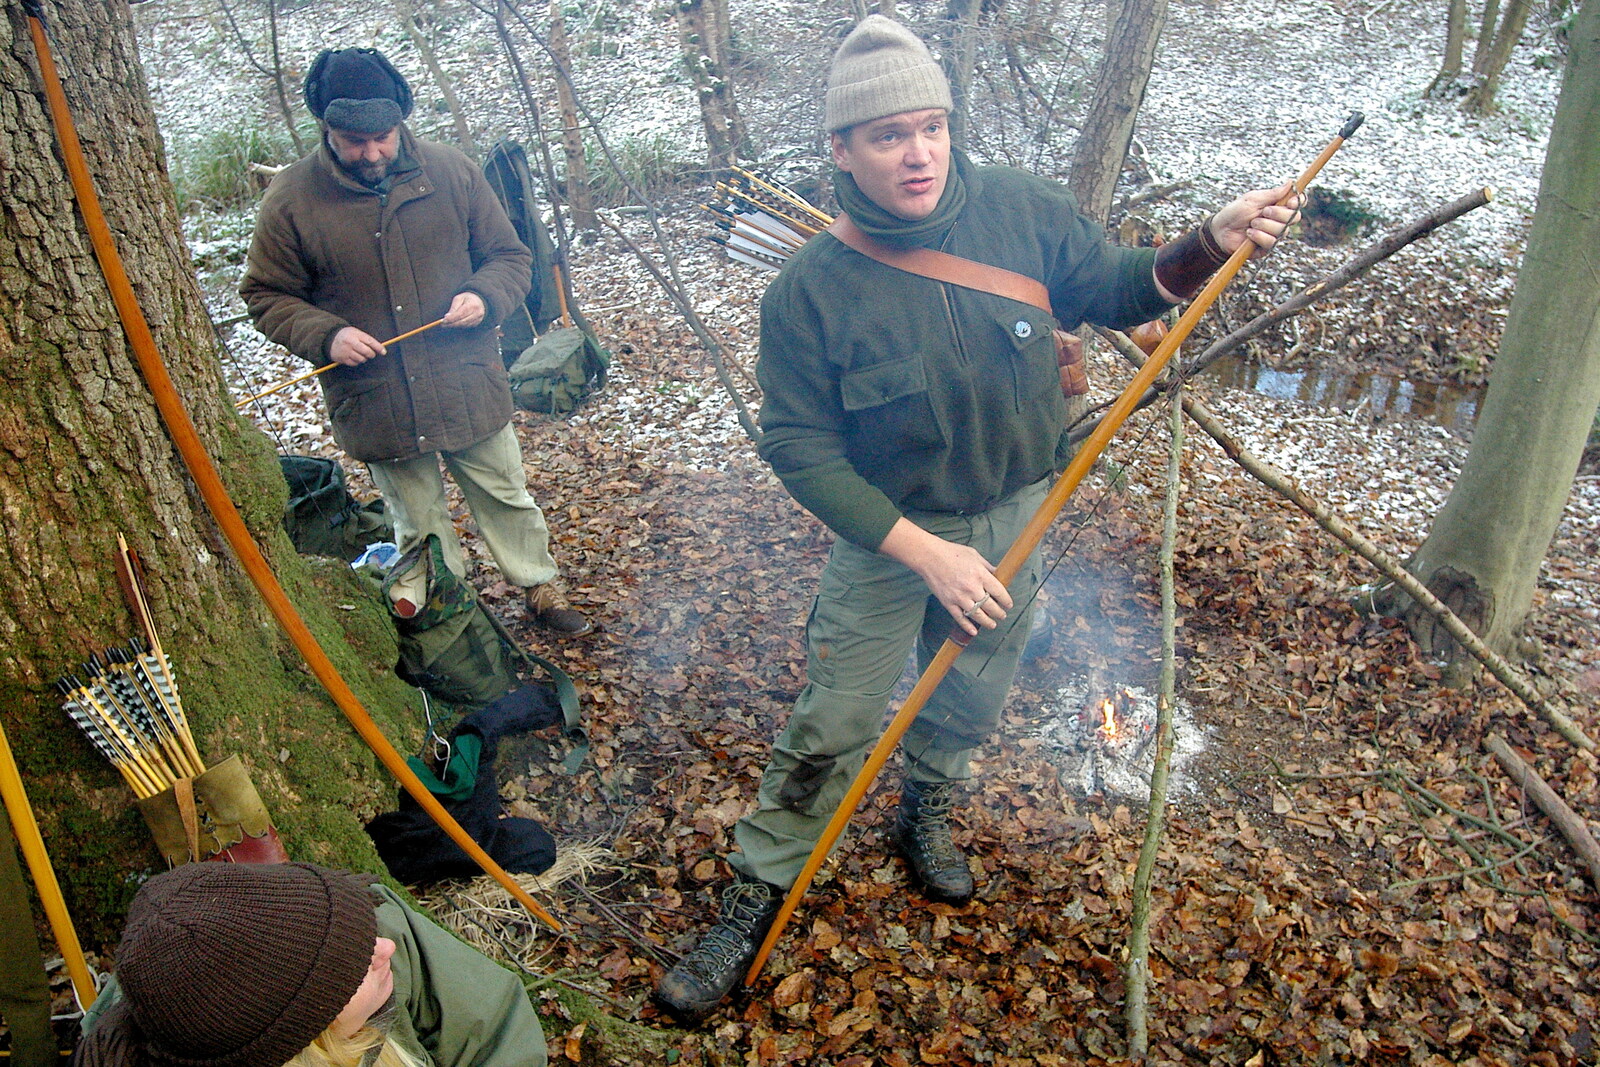 Ray warms his longbow up over embers from Walk Like a Shadow: A Day With Ray Mears, Ashdown Forest, East Sussex - 29th December 2005